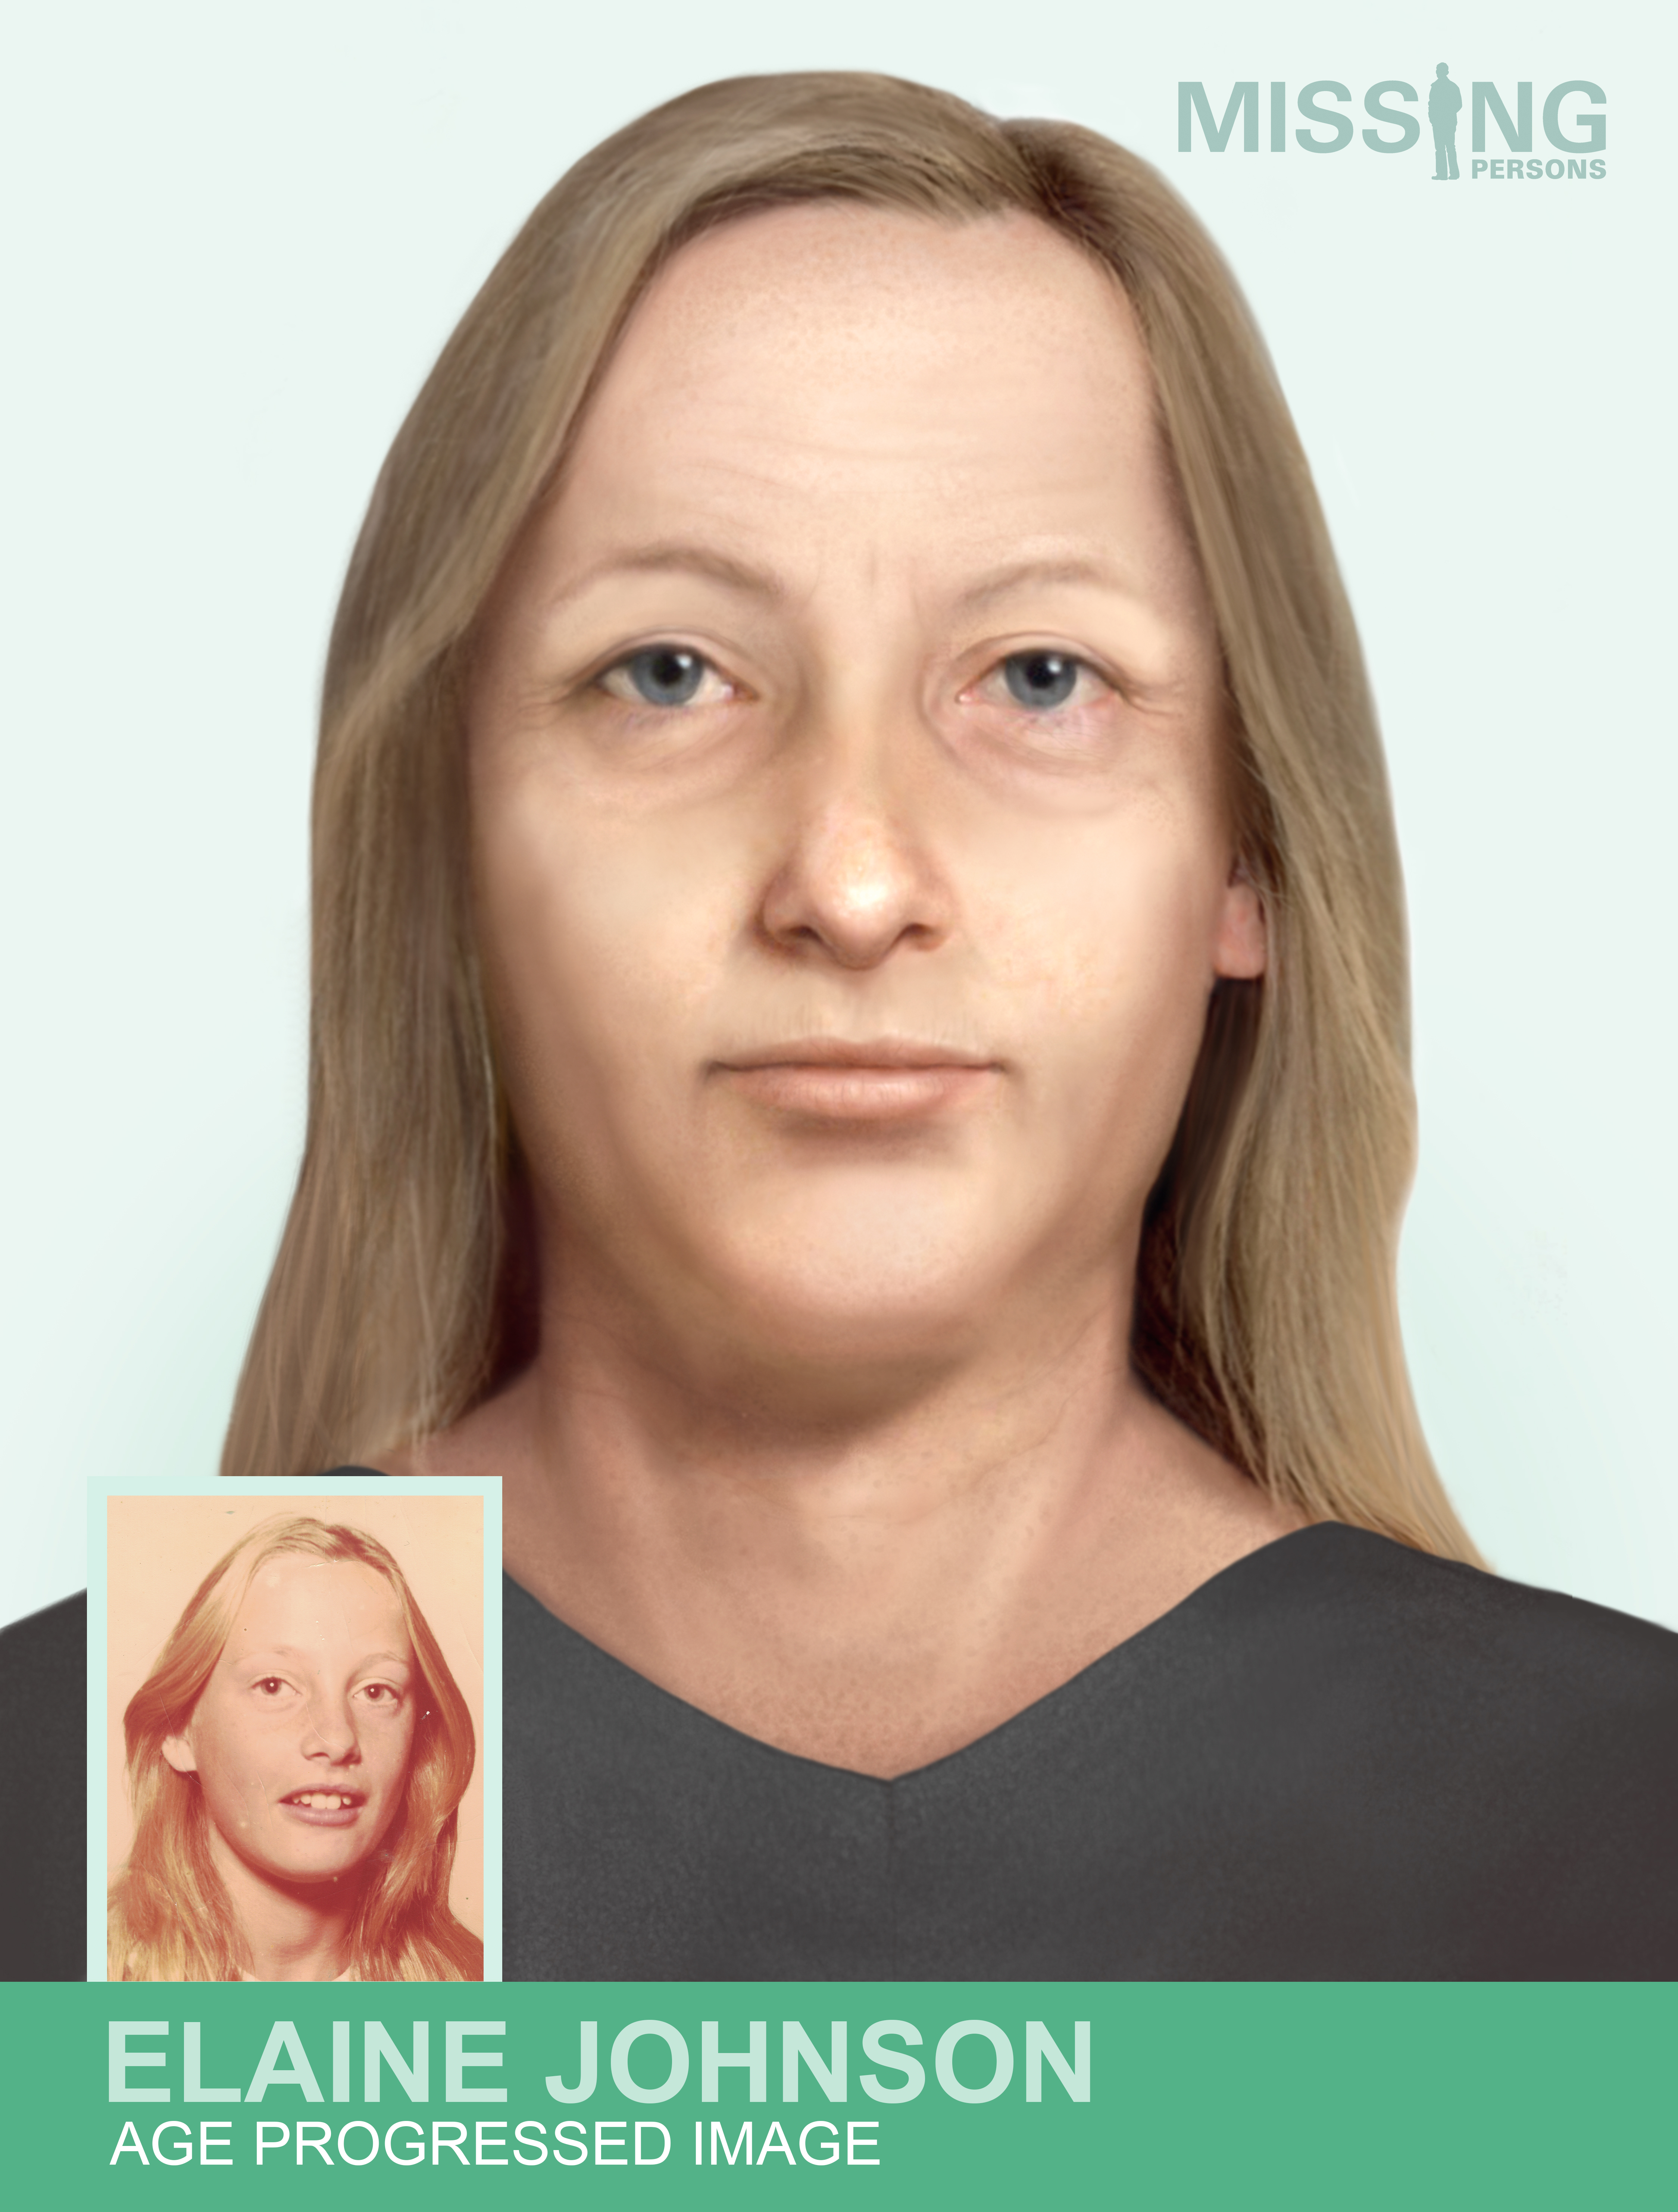 Missing person from NSW Elaine Johnson